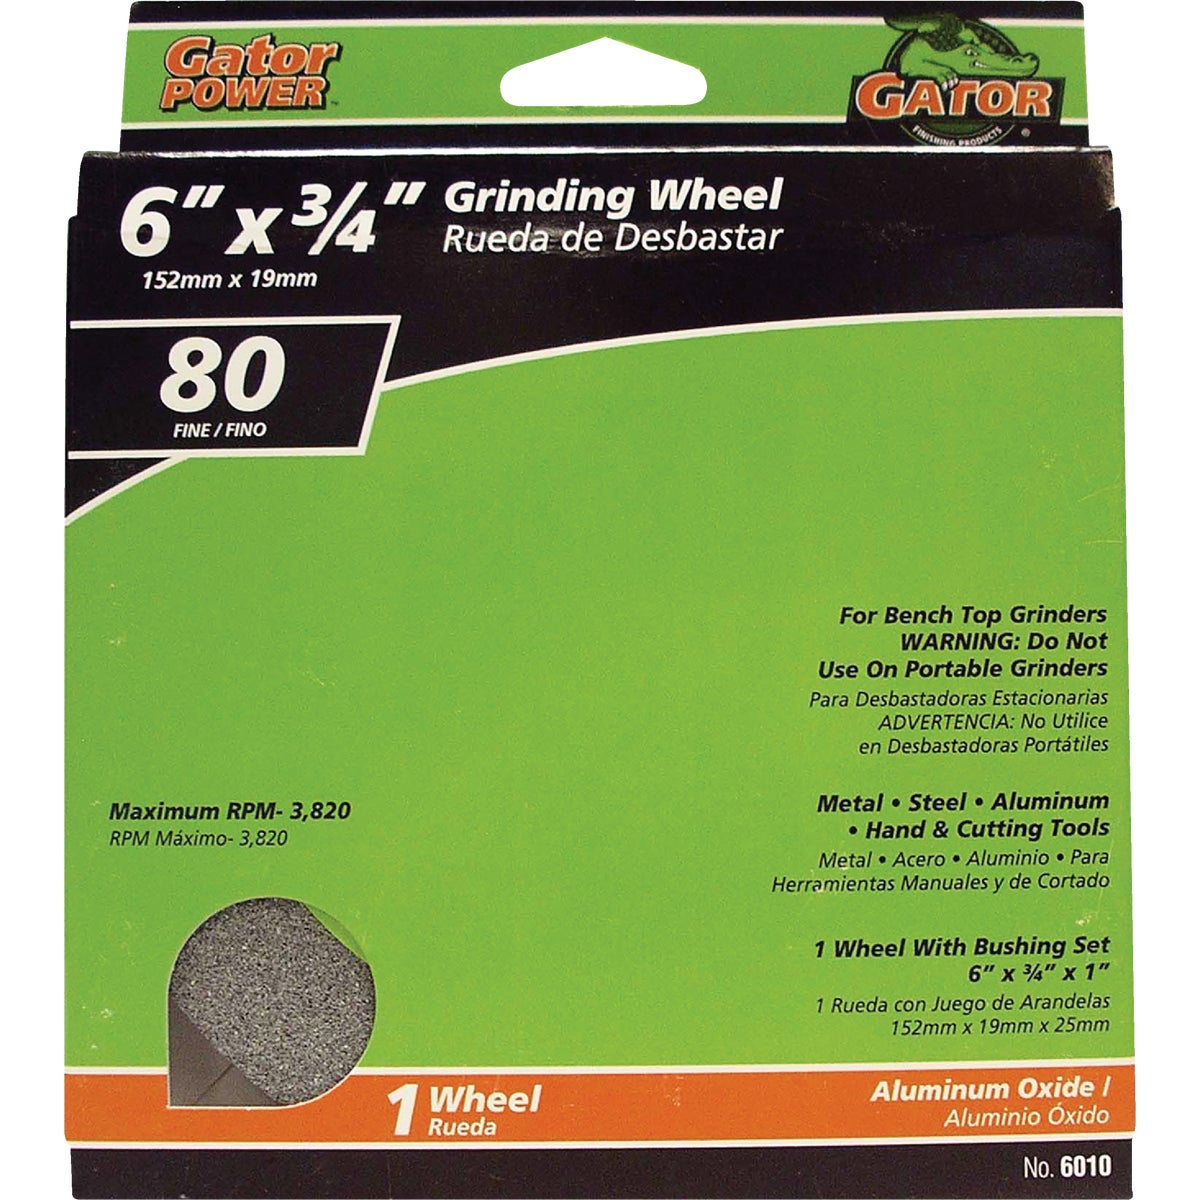 Item 346511, Gator vitrified Grinding Wheels are the perfect choice of Homeowners who 